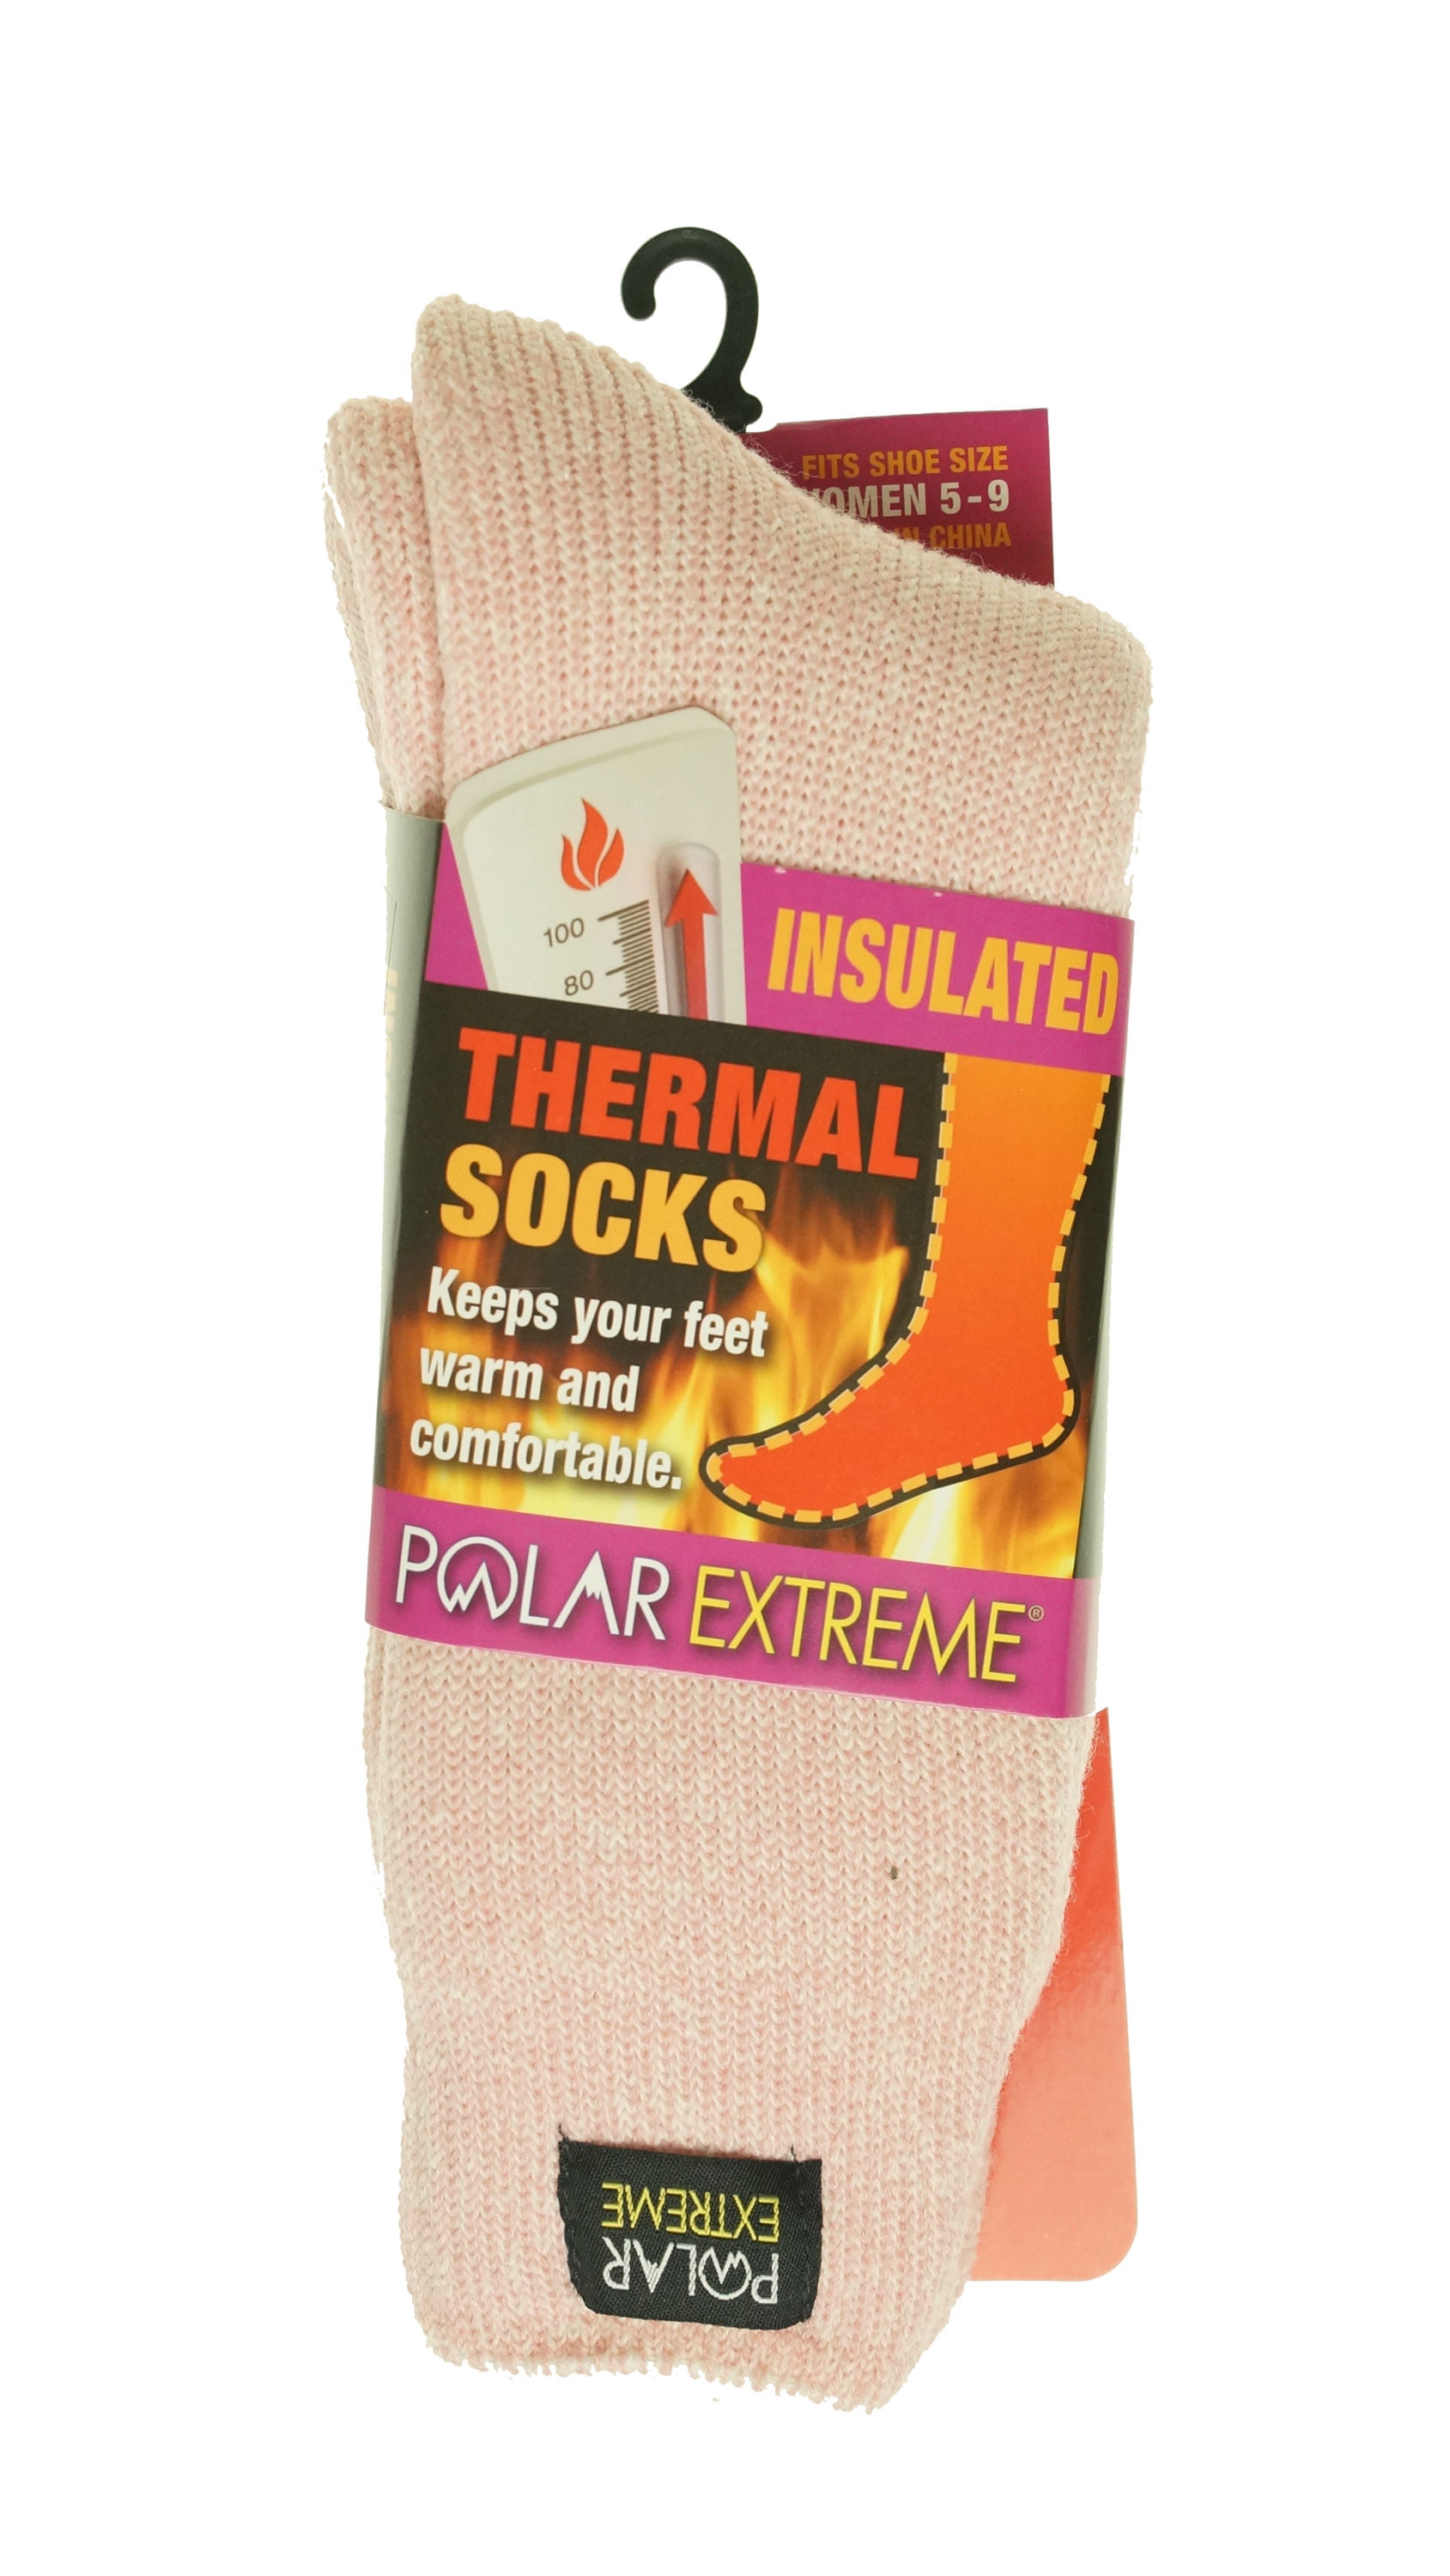 Polar Extreme Insulated Thermal Socks Shoe Size 5-9 Women Pink